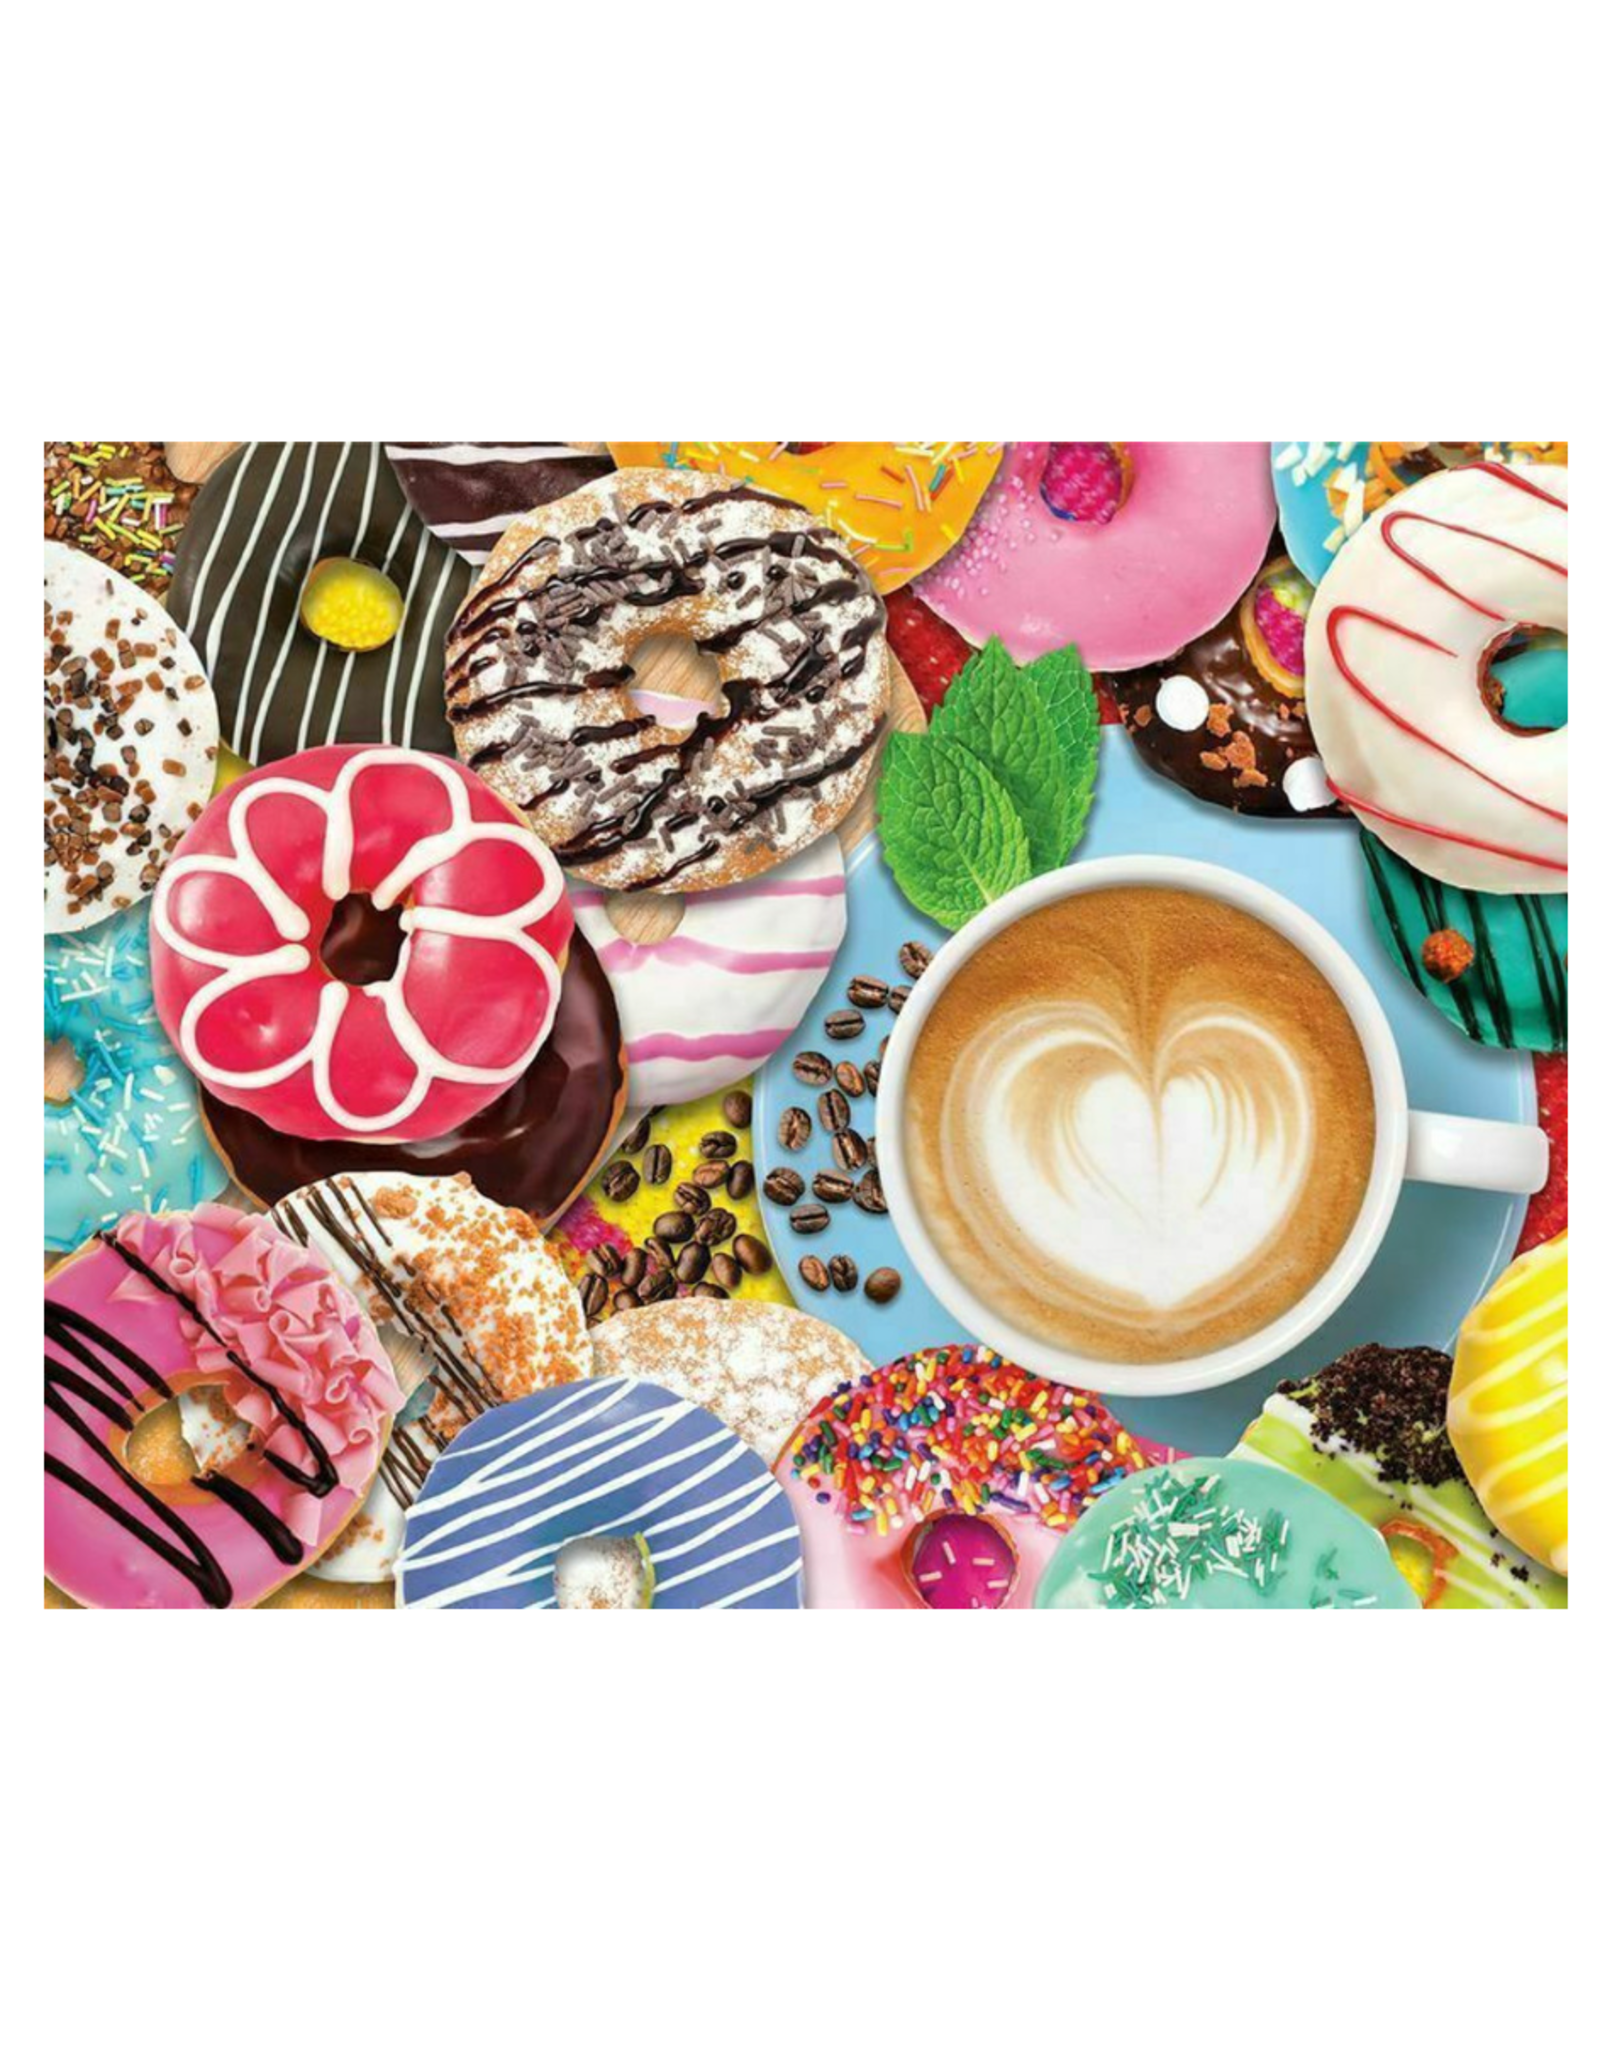 Springbok DONUTS AND COFFEE PUZZLE 500 piece